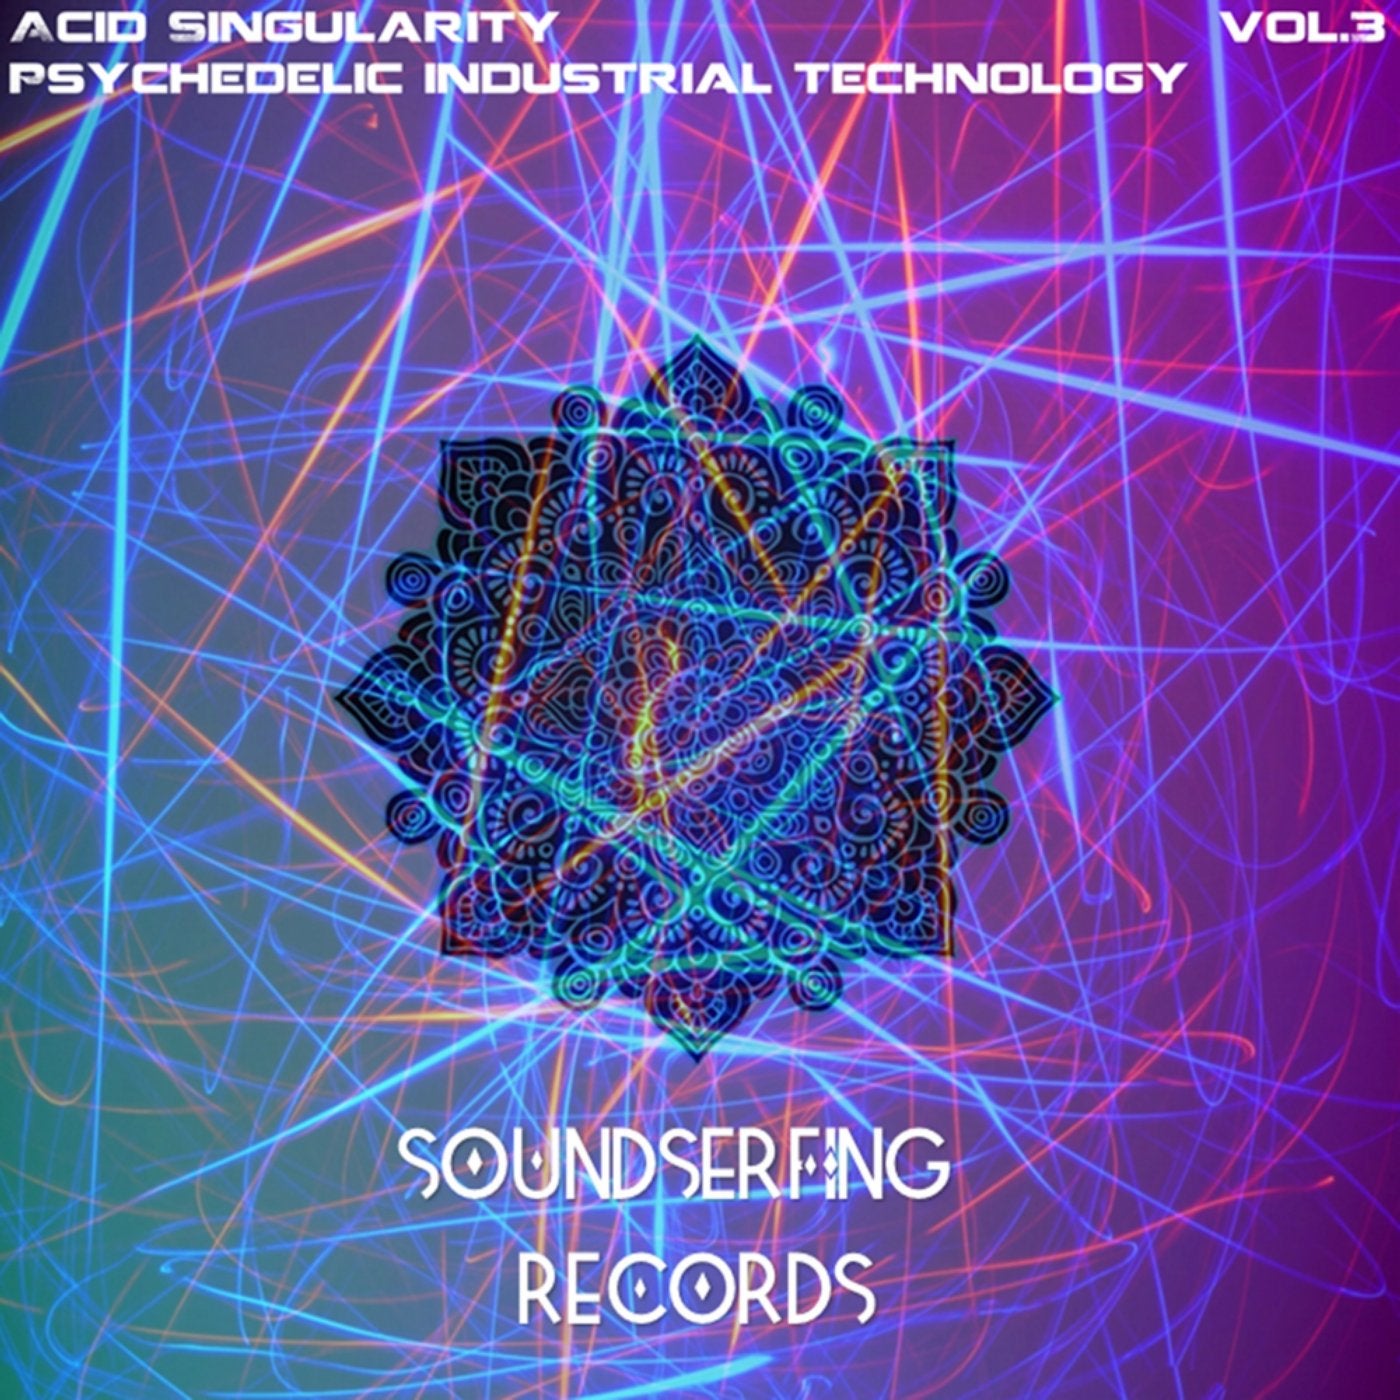 Psychedelic Industrial Technology, Vol. 3